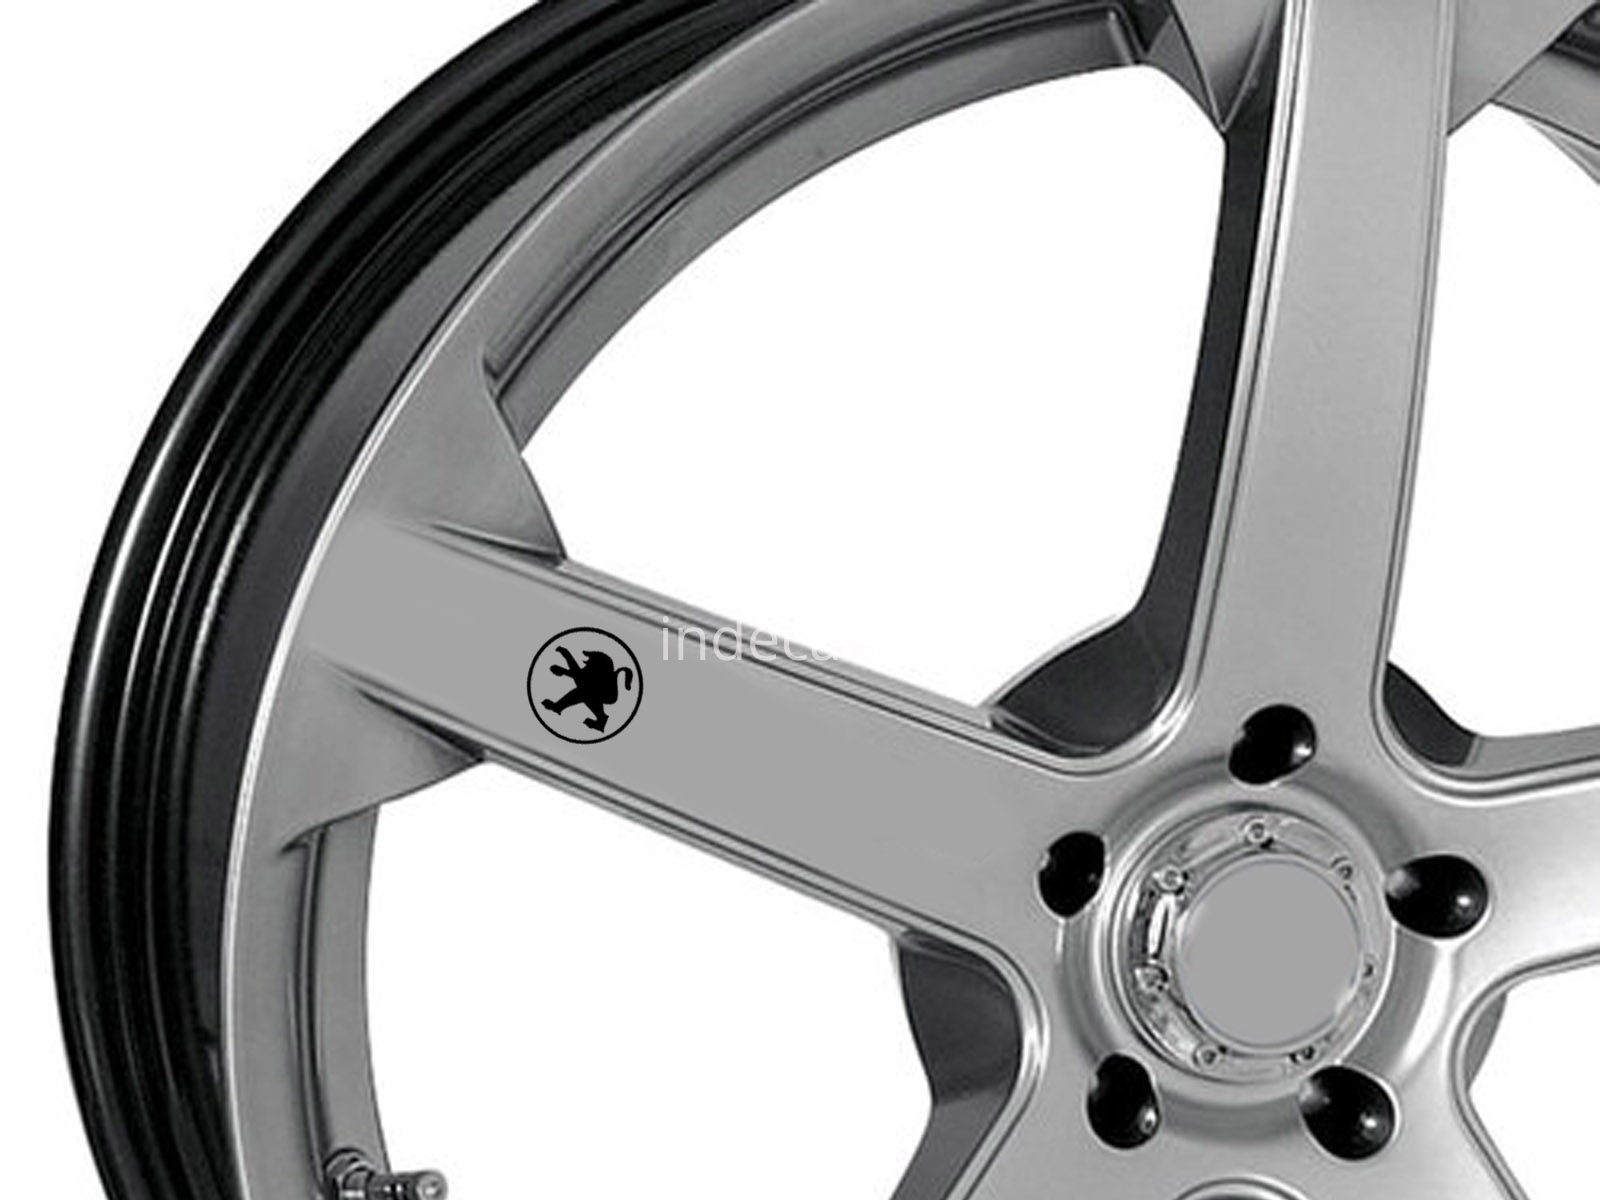 6 x Peugeot Stickers for Wheels - Black